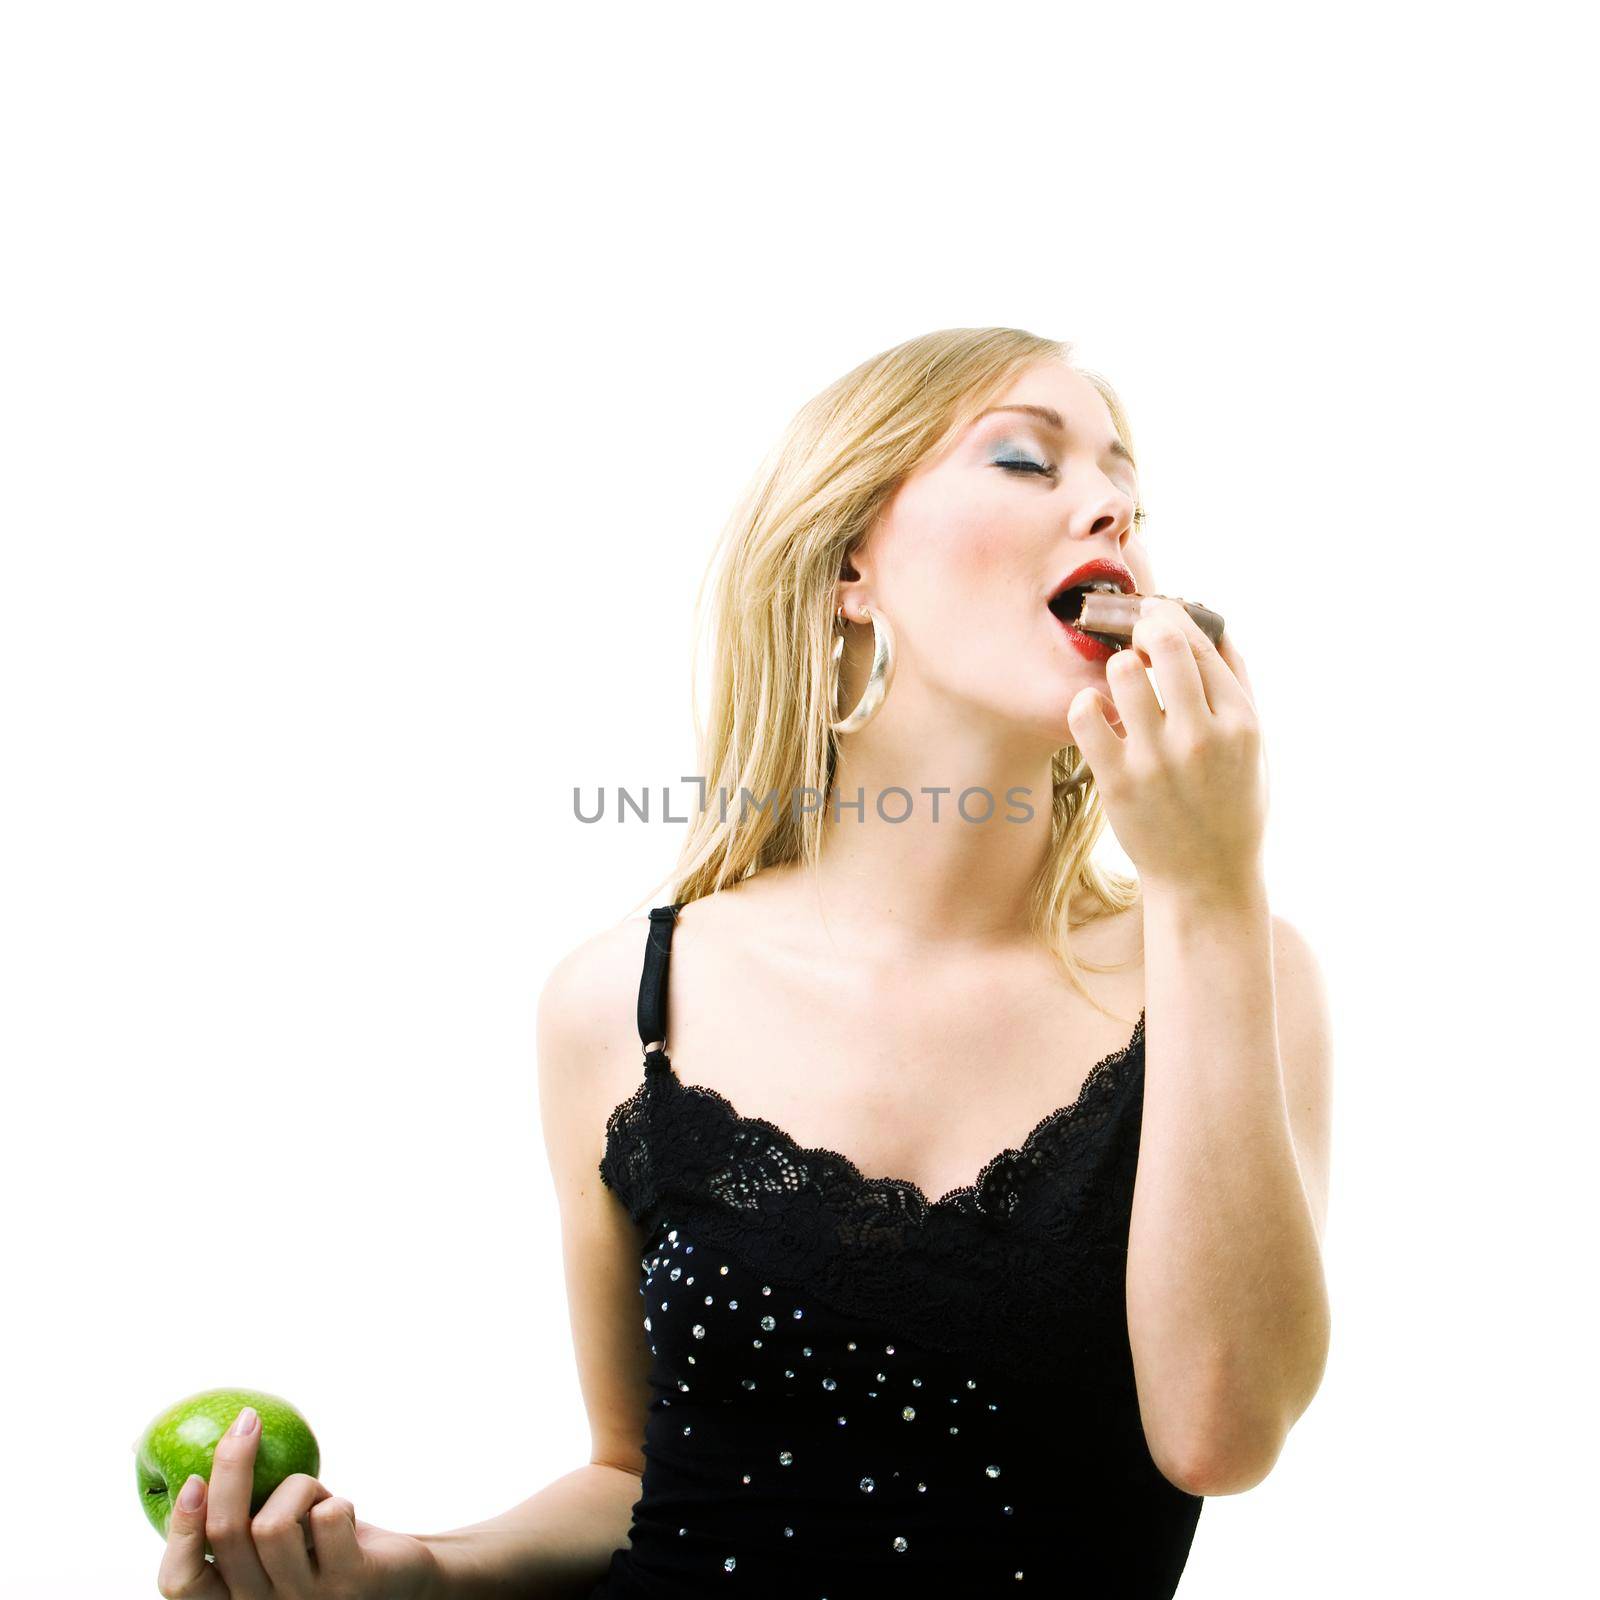 Food and healthy nutrition - Blond girl enjoying a chocolate bar and ignoring an apple